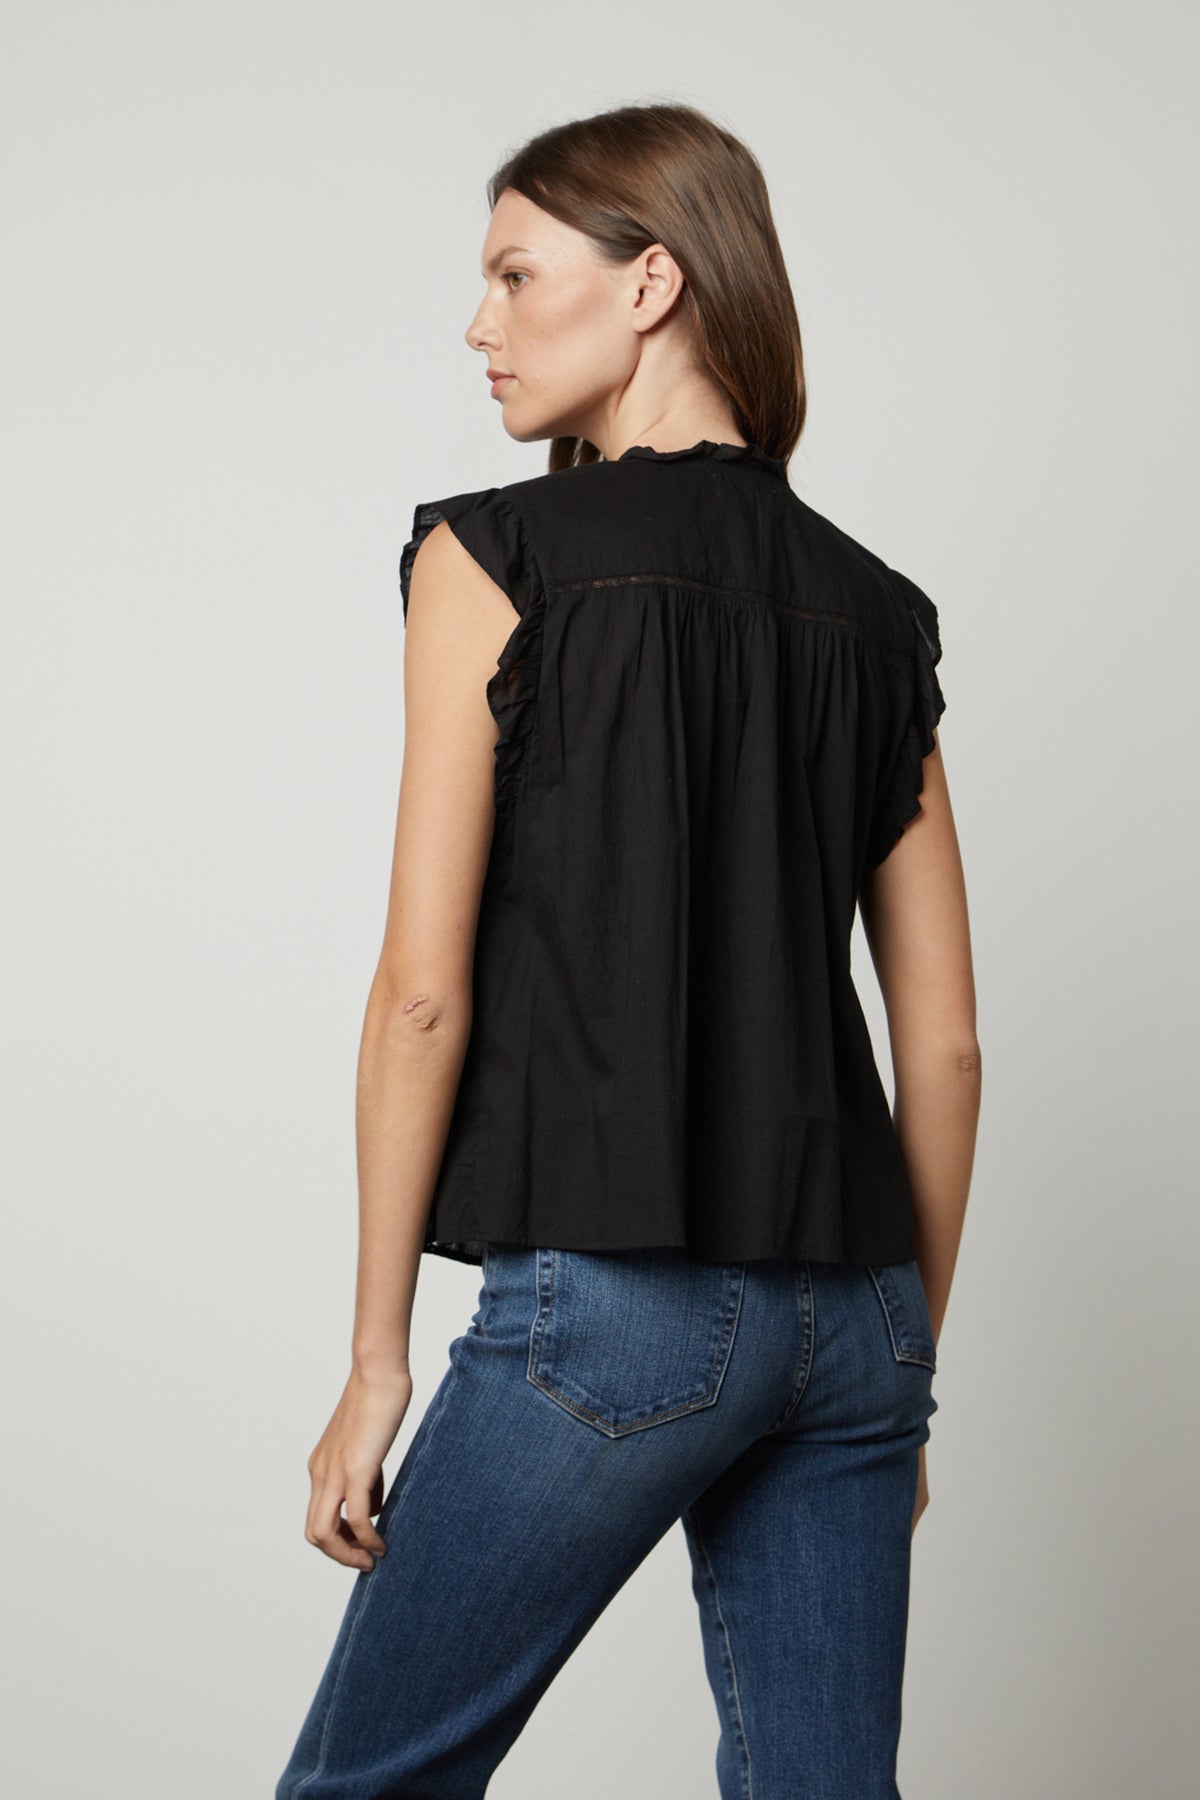 The back view of a woman wearing a Velvet by Graham & Spencer LIANA LACE TANK TOP and jeans.-26834989613249